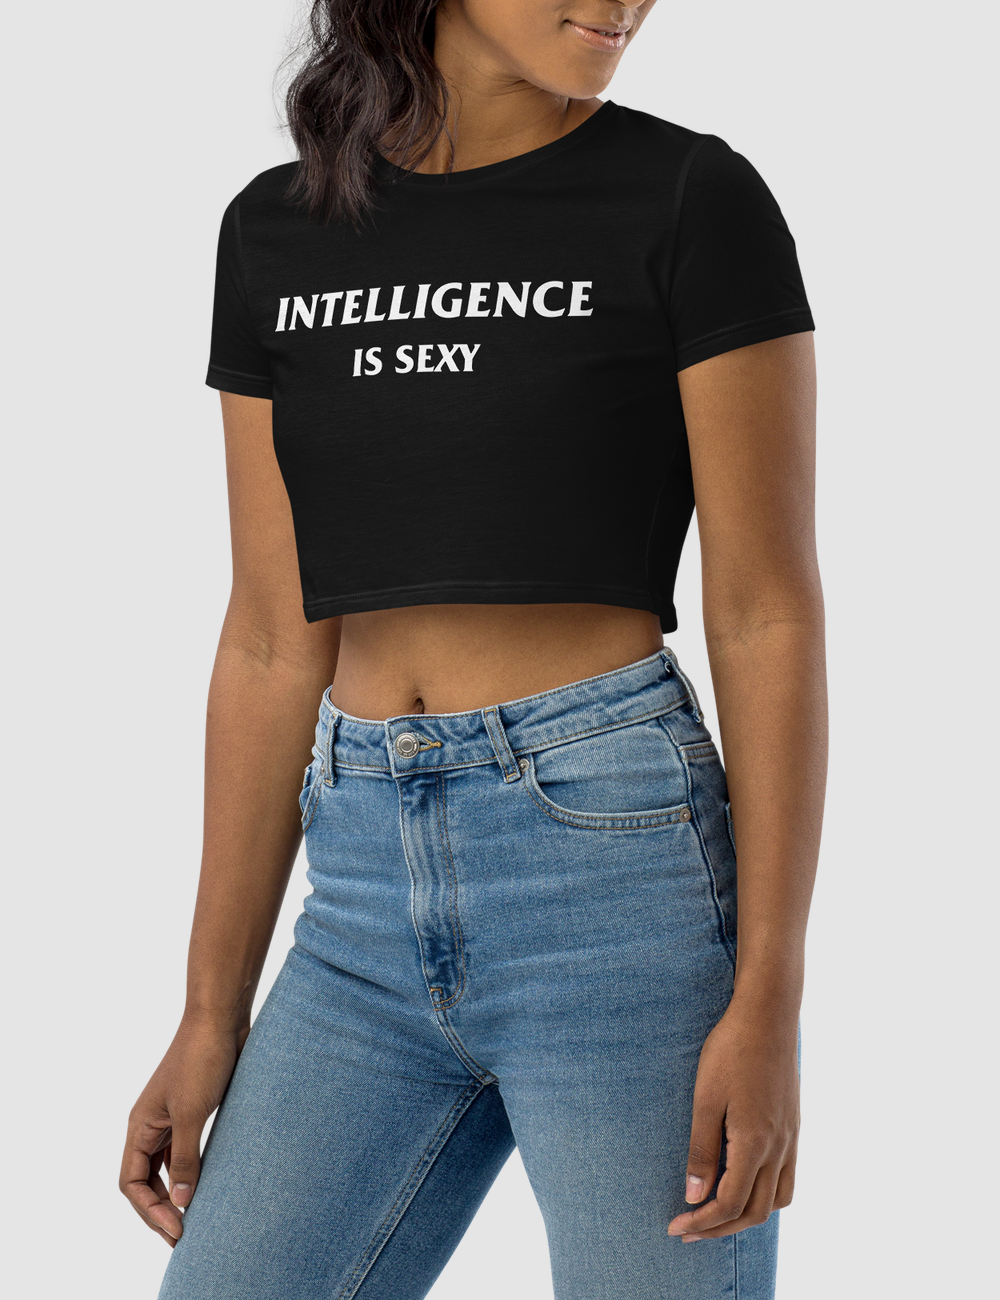 Intelligence Is Sexy Women's Fitted Crop Top T-Shirt OniTakai